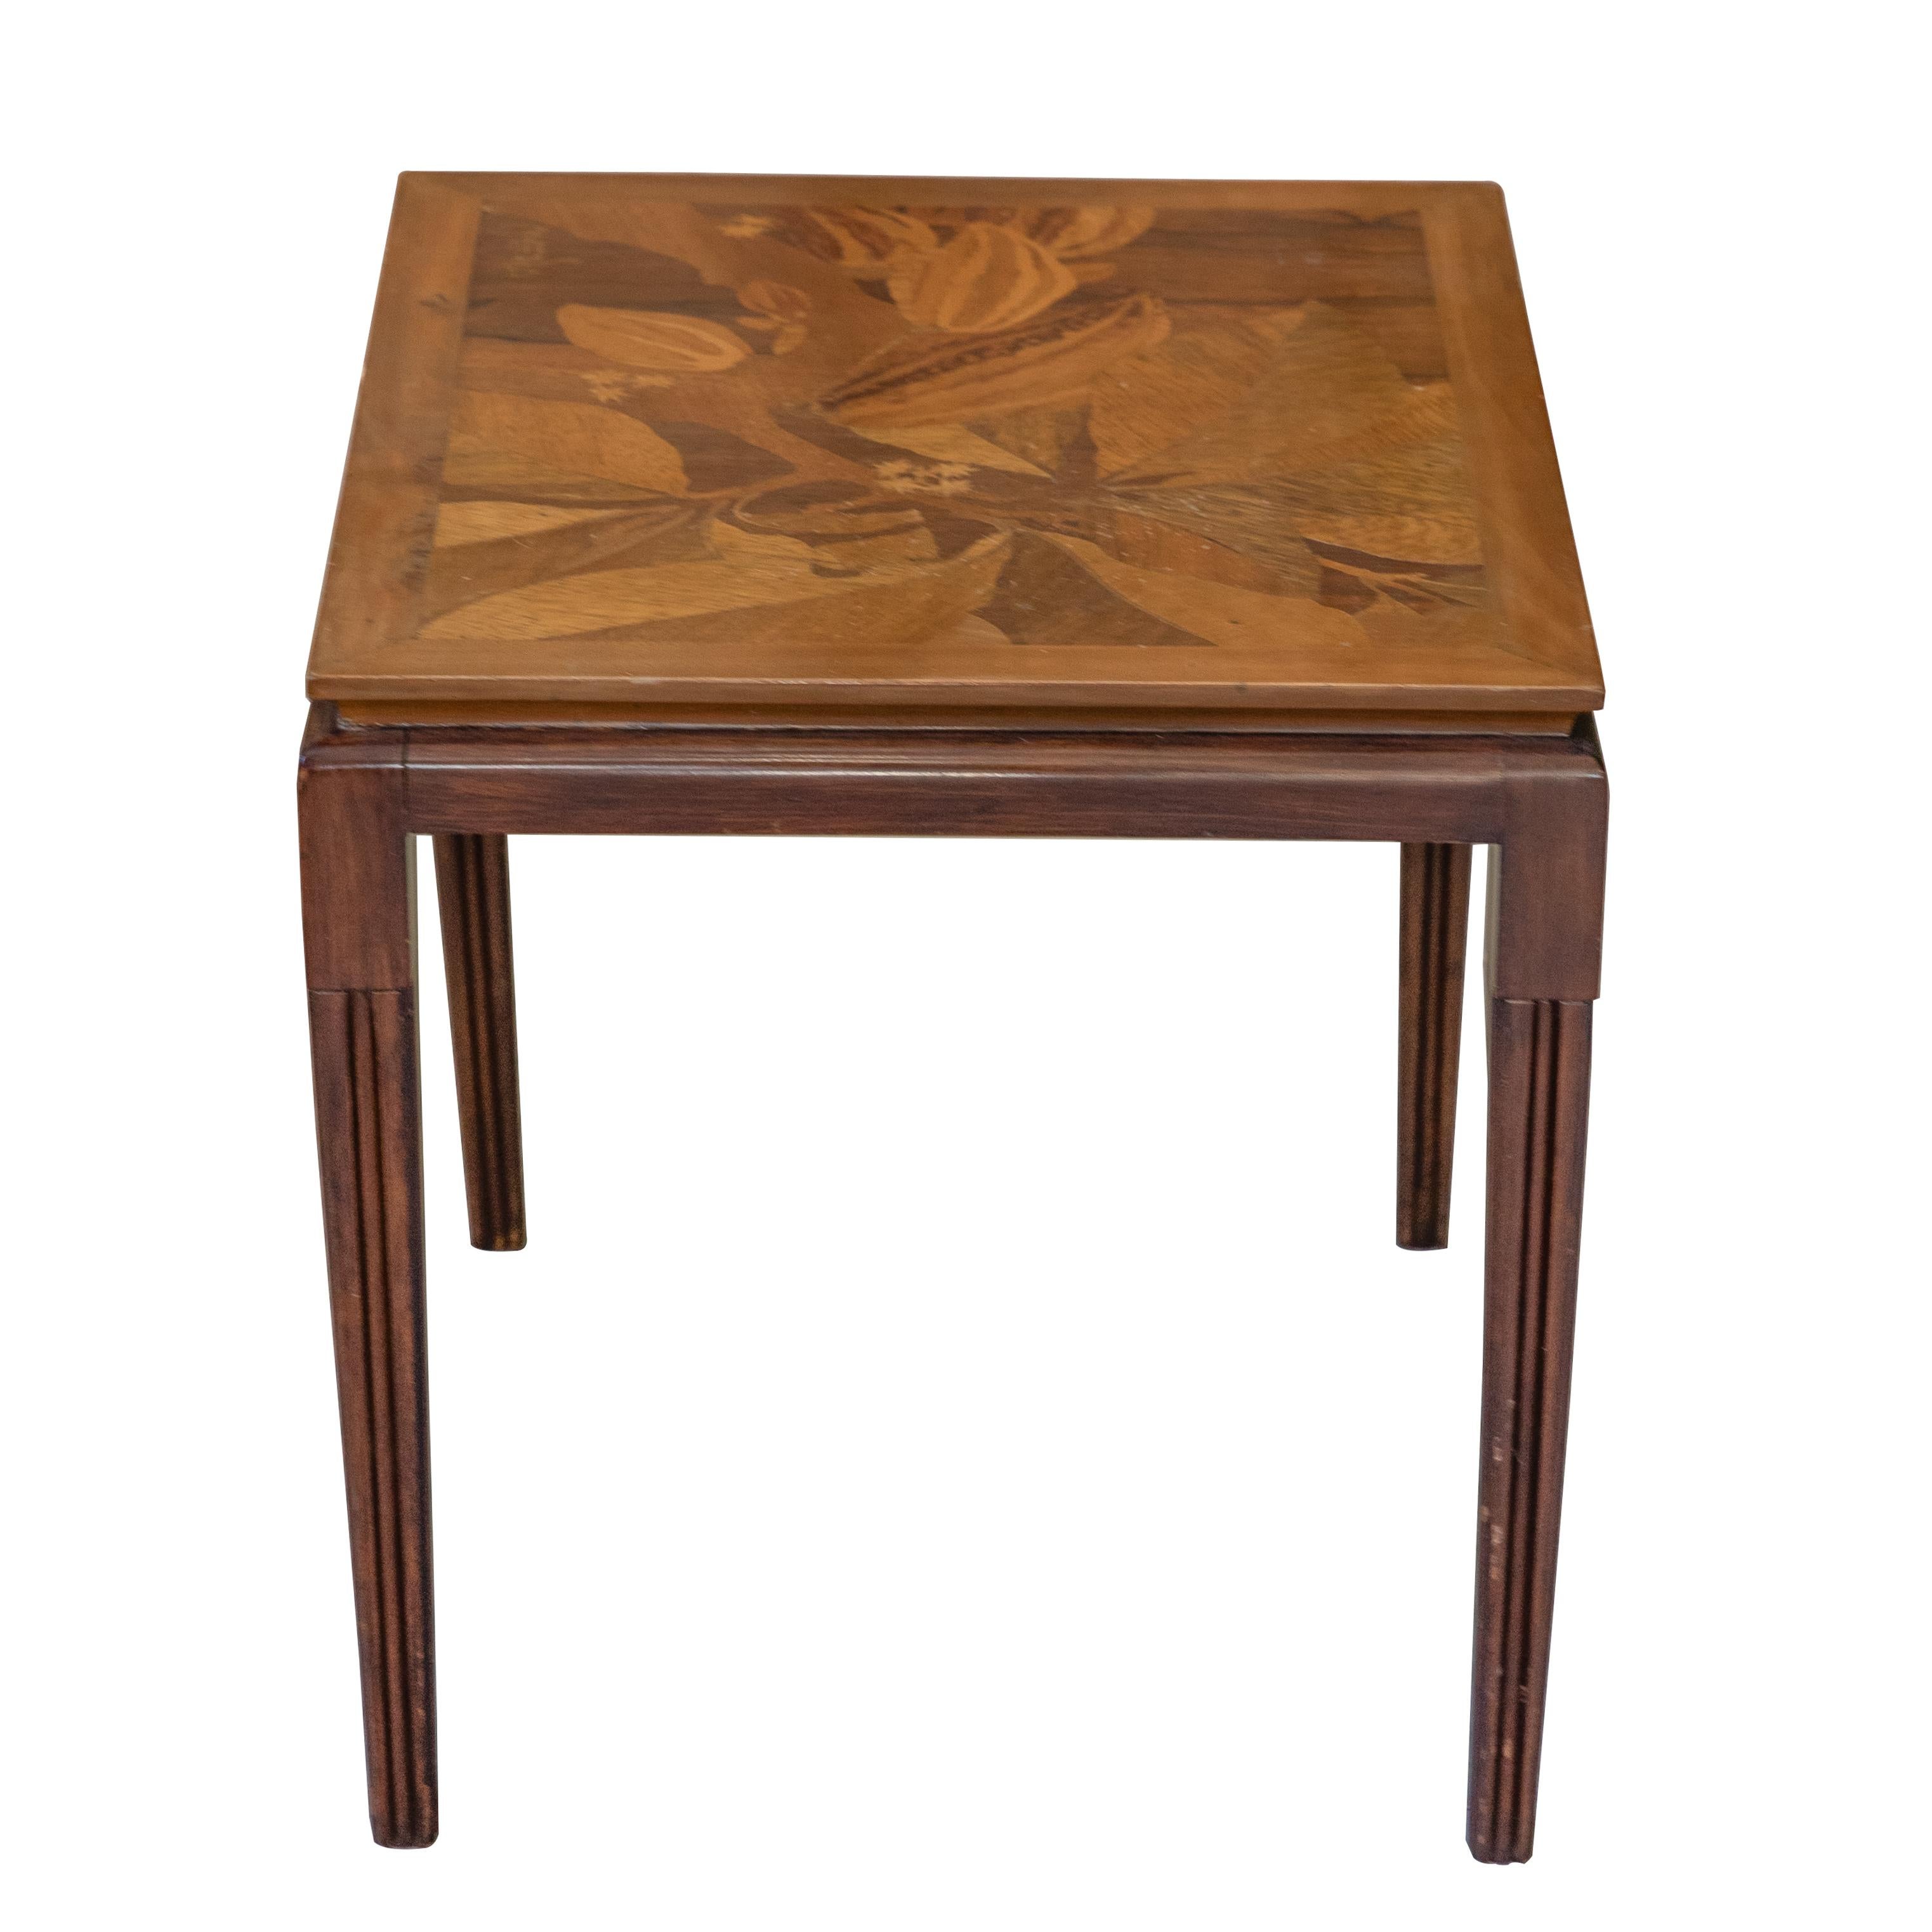 Emile Gallé inlaid early 20th century Art Nouveau side table with floral and foliage motifs. French designer Emile Gallé is considered to be one of the driving forces behind the Art Nouveau movement. His artwork lives on in almost every museum